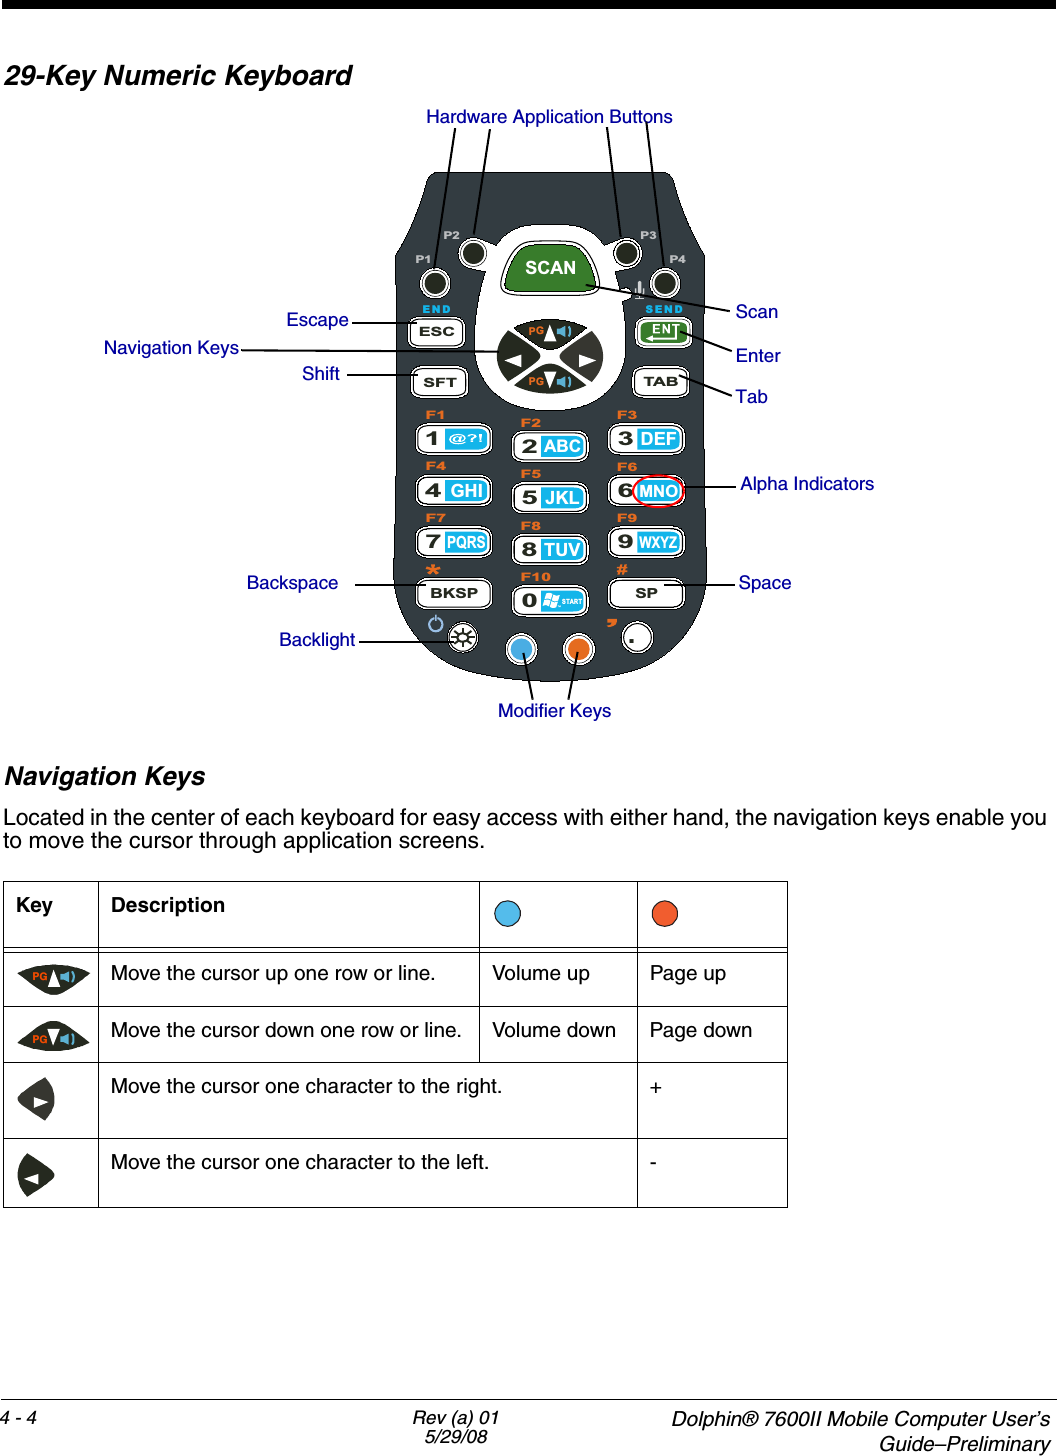 4 - 4 Rev (a) 015/29/08  Dolphin® 7600II Mobile Computer User’sGuide–Preliminary29-Key Numeric Keyboard Navigation KeysLocated in the center of each keyboard for easy access with either hand, the navigation keys enable you to move the cursor through application screens.Key DescriptionMove the cursor up one row or line. Volume up Page upMove the cursor down one row or line. Volume down Page downMove the cursor one character to the right. +Move the cursor one character to the left. -F1F2 F3F4 F5 F6F7 F8 F9F10P1P2 P3P4END SENDSCANPGPG.1ESCSFT TABGHI47PQRSBKSP0STARTSP8TUVJKL52ABC9WXYZ6MNODEF3BacklightModifier KeysEscapeNavigation KeysTab Shift EnterScanHardware Application ButtonsBackspace SpaceAlpha IndicatorsPGPG